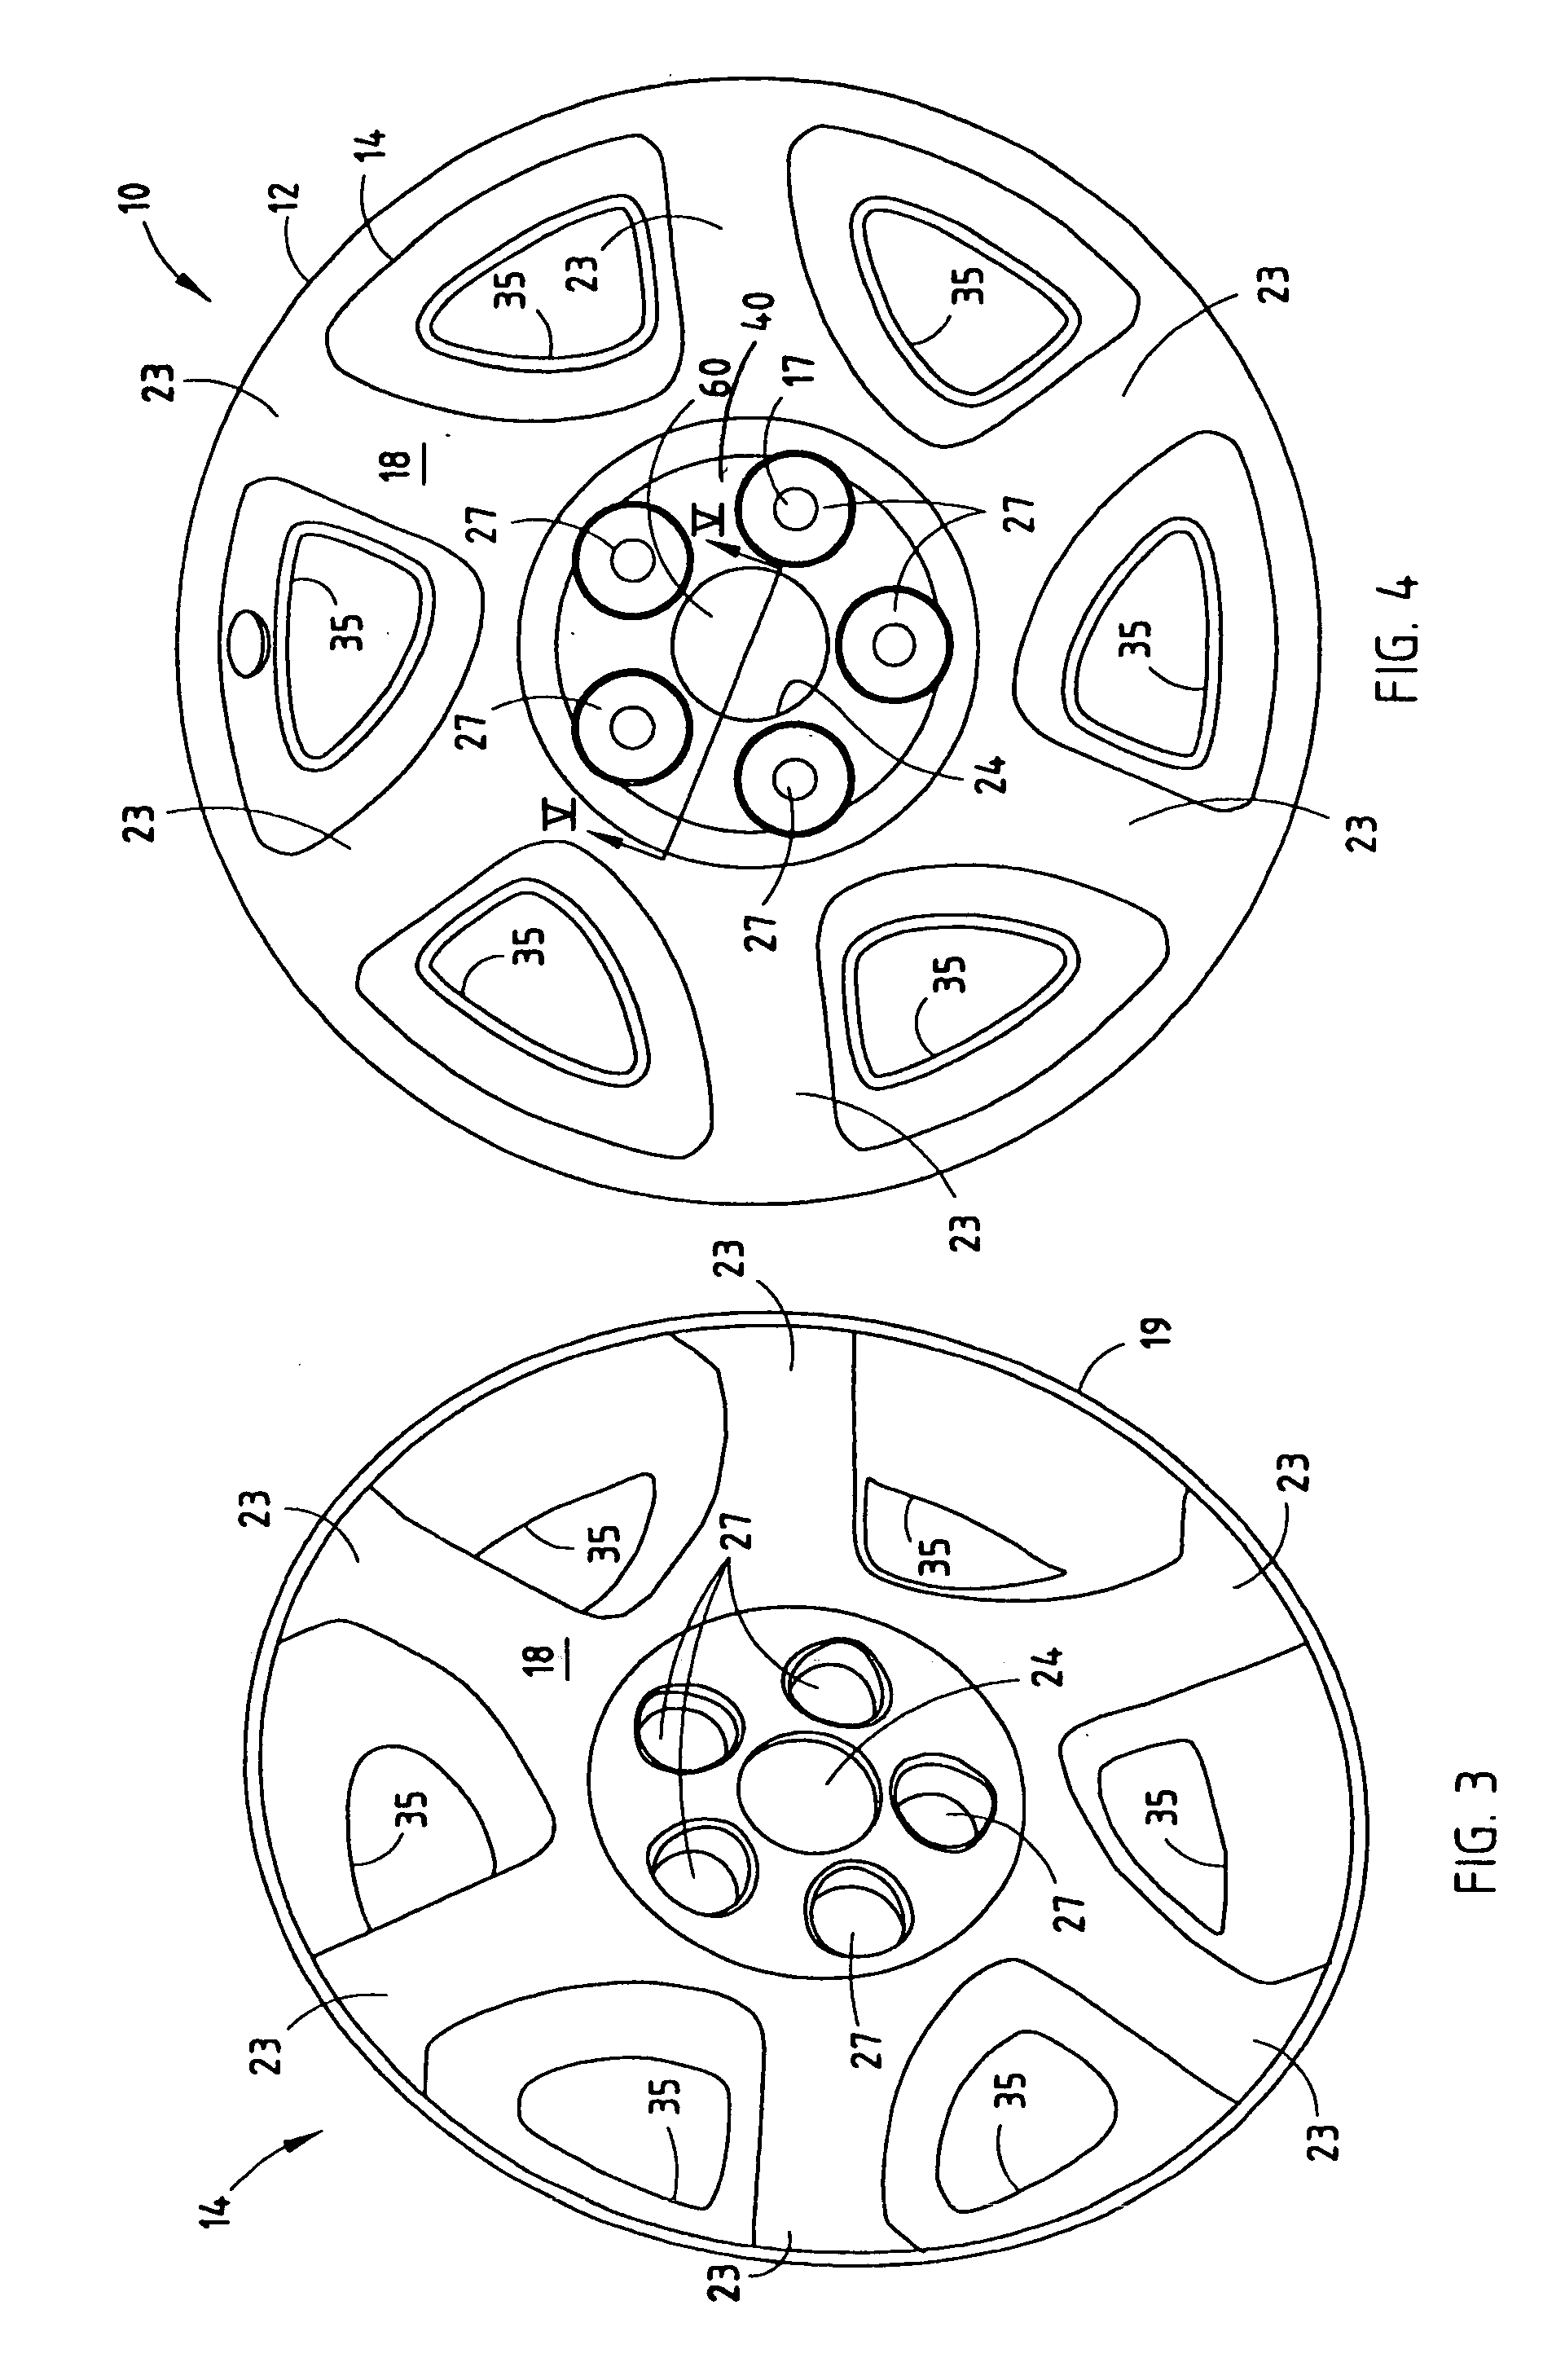 Wheel clad assembly